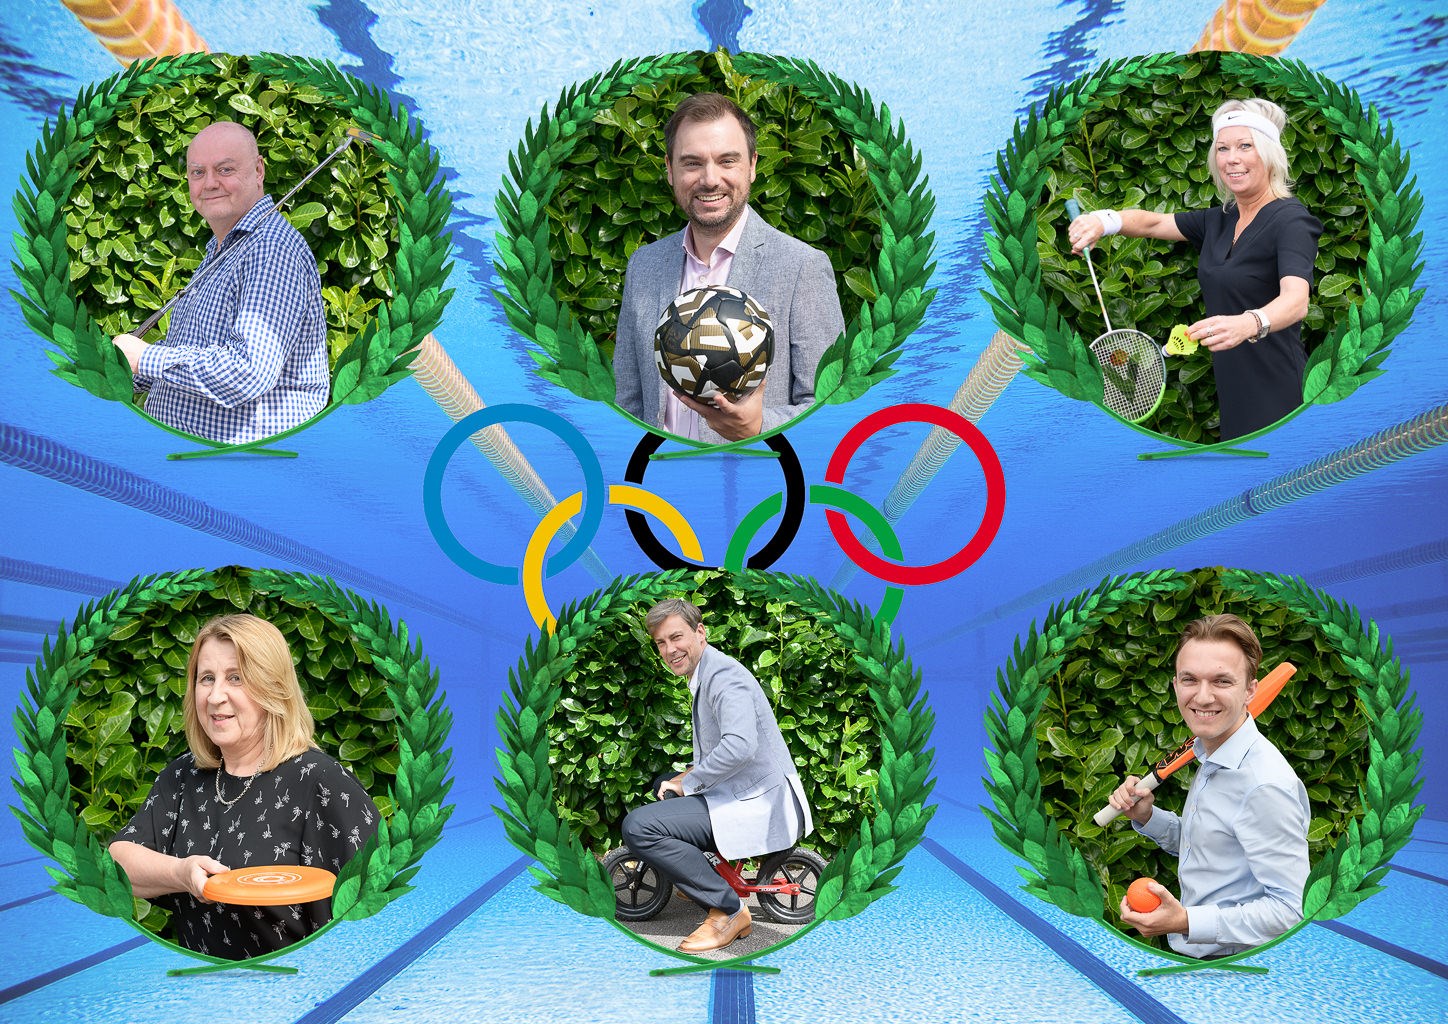 Image shows Jukes Insurance Brokers in Bromsgrove team in various Olympic style poses